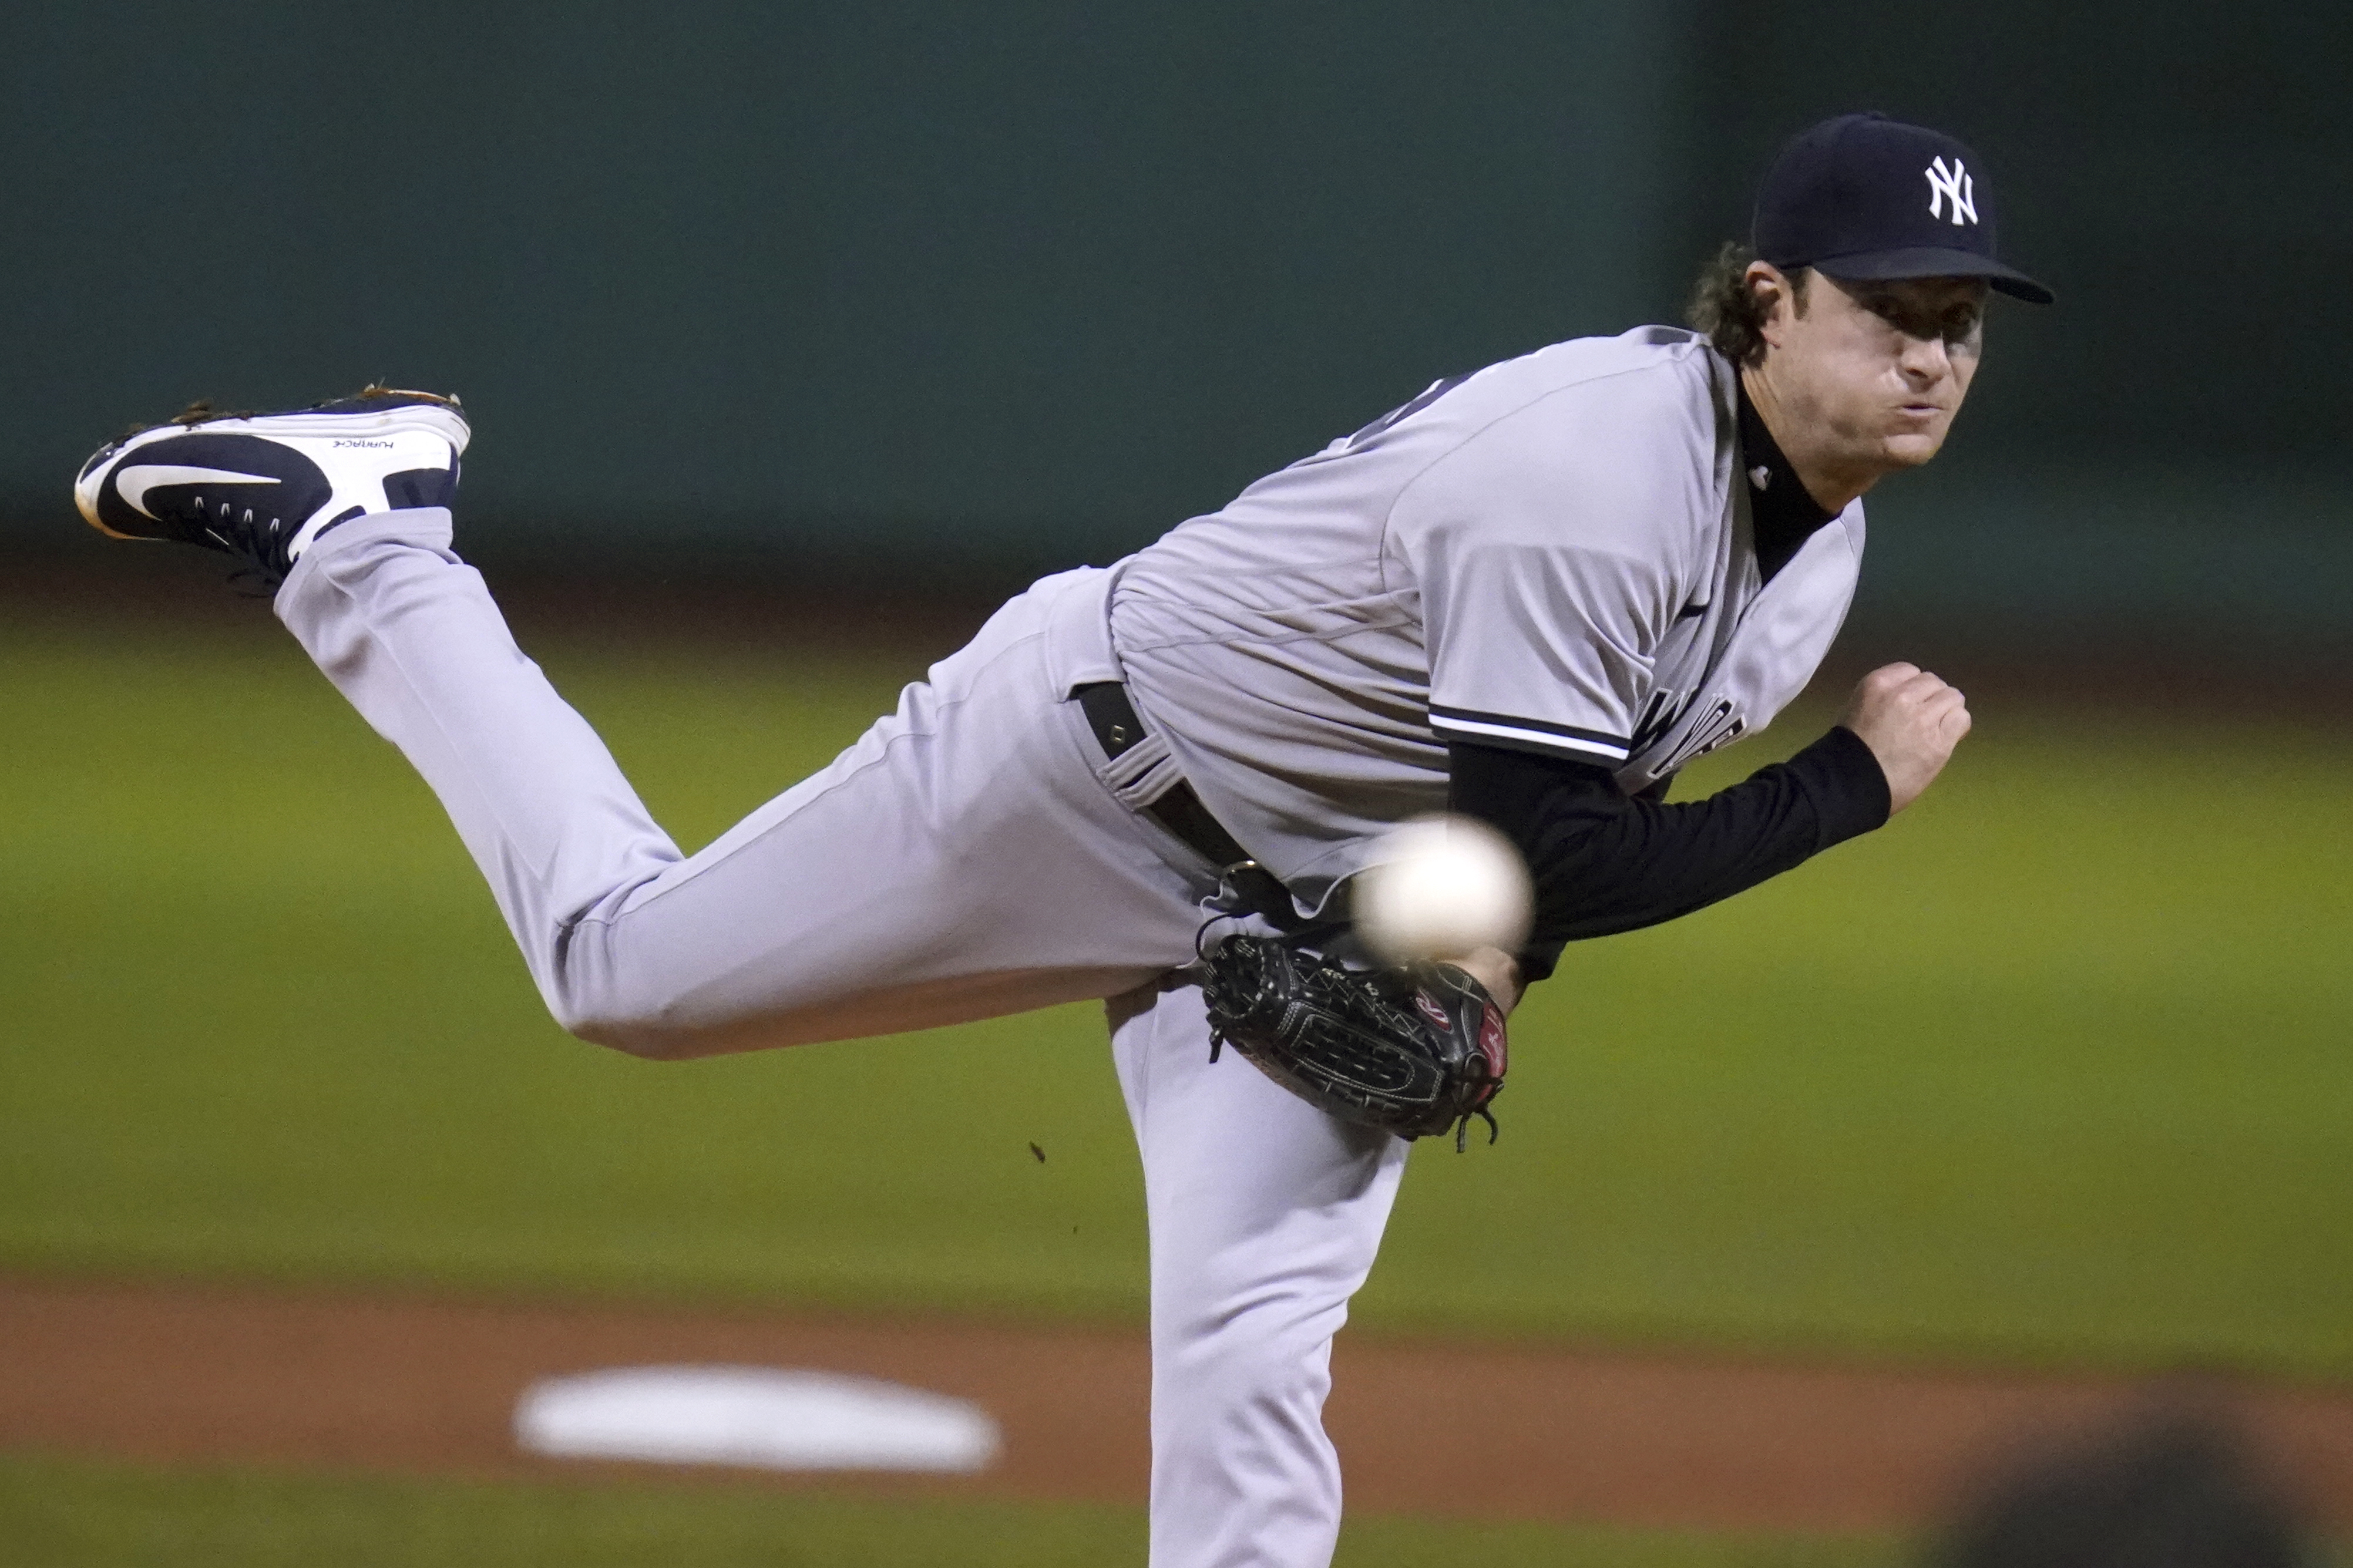 Yankees' Gerrit Cole's goal this start: Not aiming for perfection